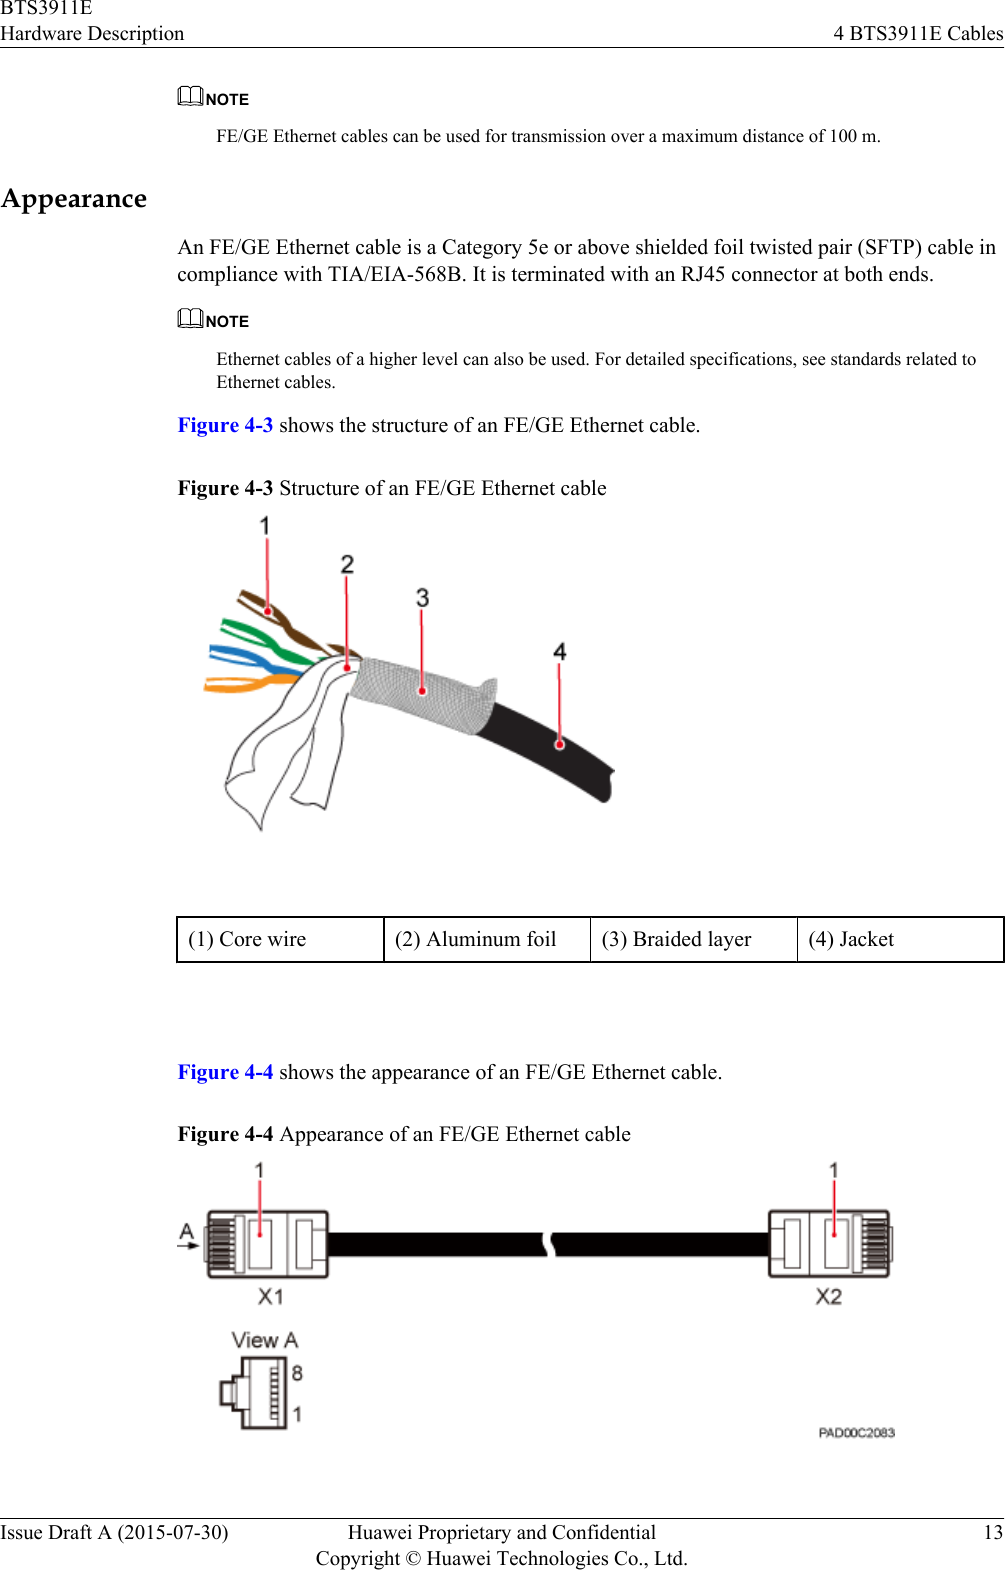 NOTEFE/GE Ethernet cables can be used for transmission over a maximum distance of 100 m.AppearanceAn FE/GE Ethernet cable is a Category 5e or above shielded foil twisted pair (SFTP) cable incompliance with TIA/EIA-568B. It is terminated with an RJ45 connector at both ends.NOTEEthernet cables of a higher level can also be used. For detailed specifications, see standards related toEthernet cables.Figure 4-3 shows the structure of an FE/GE Ethernet cable.Figure 4-3 Structure of an FE/GE Ethernet cable(1) Core wire (2) Aluminum foil (3) Braided layer (4) Jacket Figure 4-4 shows the appearance of an FE/GE Ethernet cable.Figure 4-4 Appearance of an FE/GE Ethernet cableBTS3911EHardware Description 4 BTS3911E CablesIssue Draft A (2015-07-30) Huawei Proprietary and ConfidentialCopyright © Huawei Technologies Co., Ltd.13